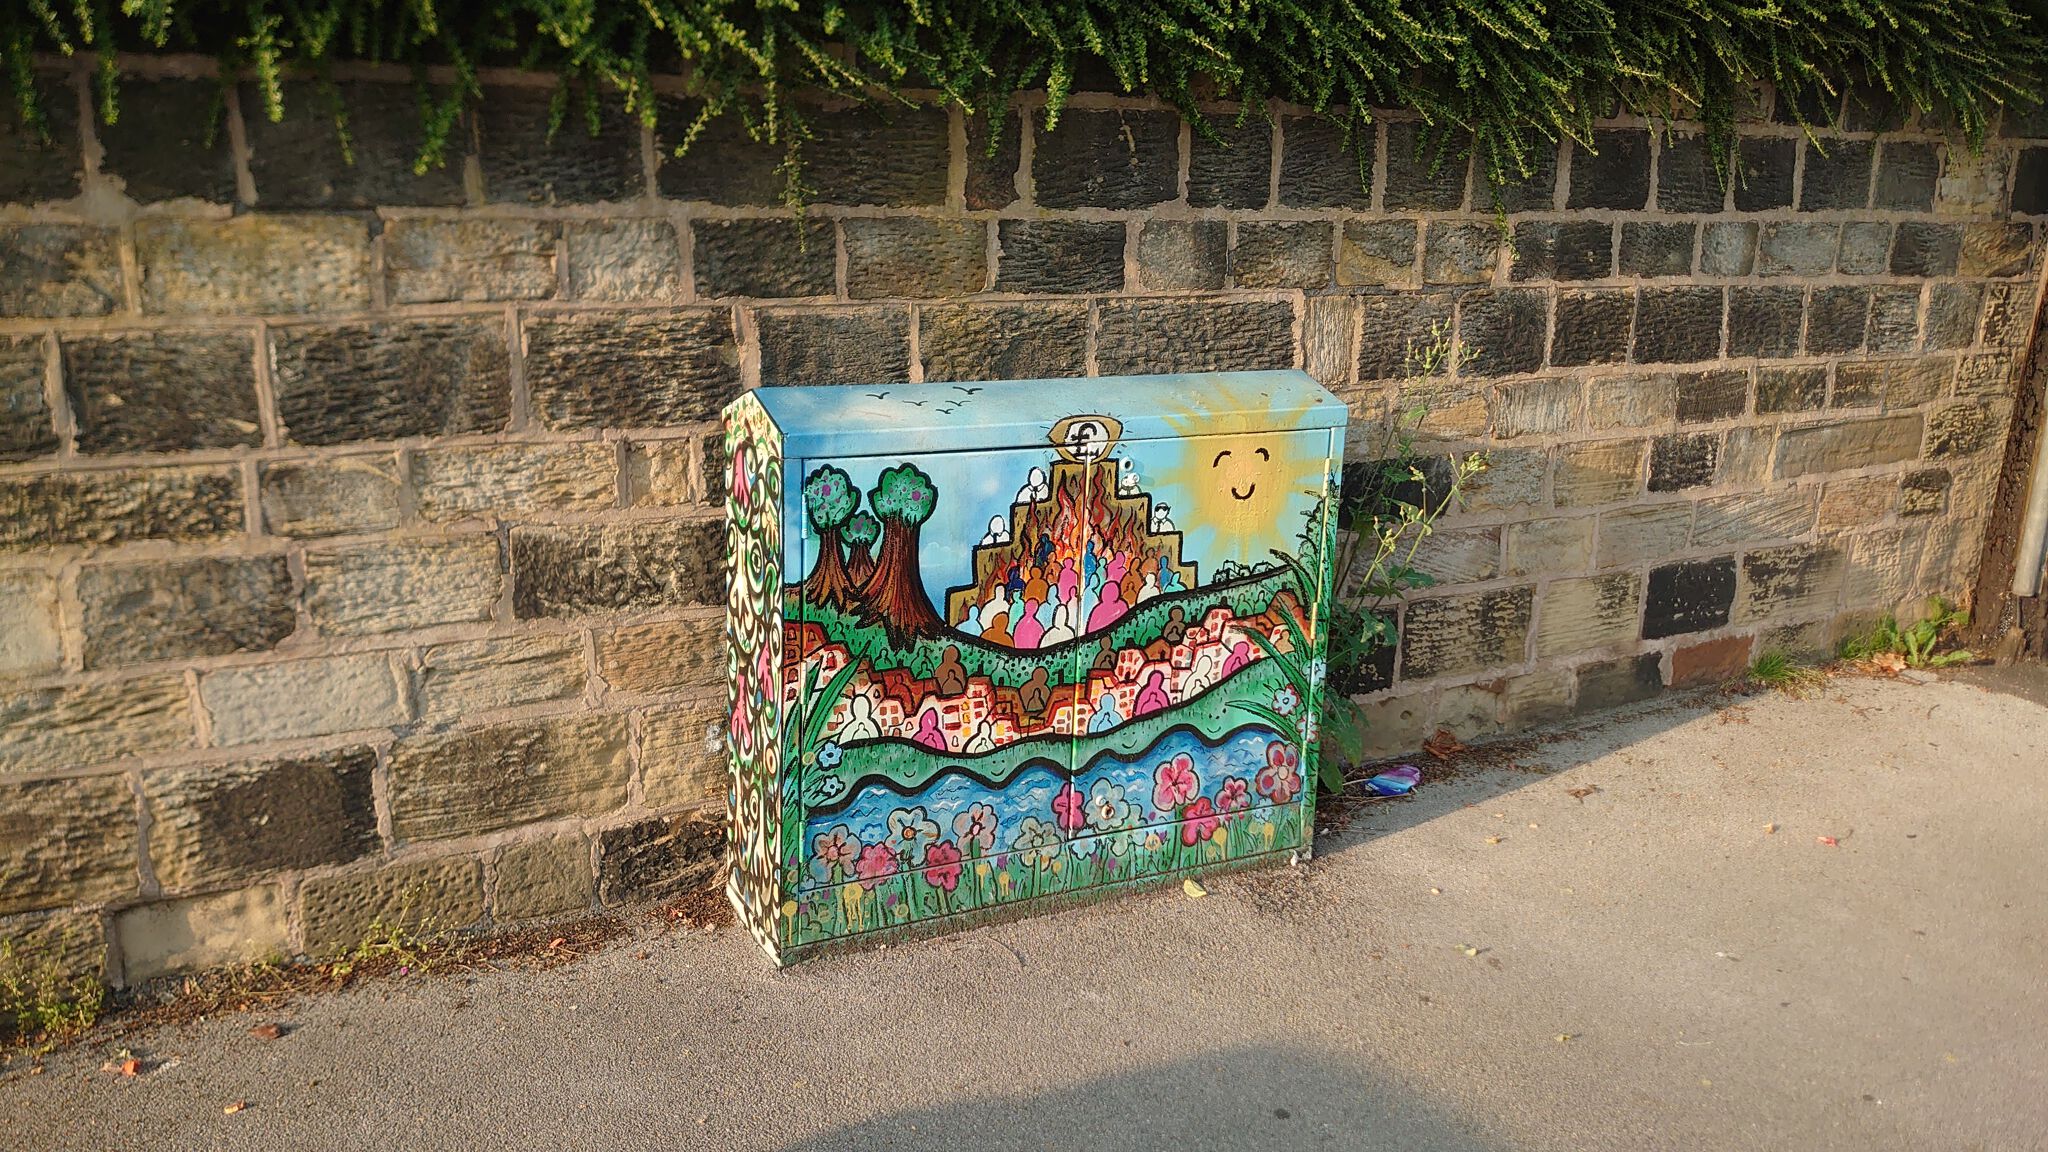 Jack Wilfred Grieve (CreamyLines)&mdash;Electrical Box Mural